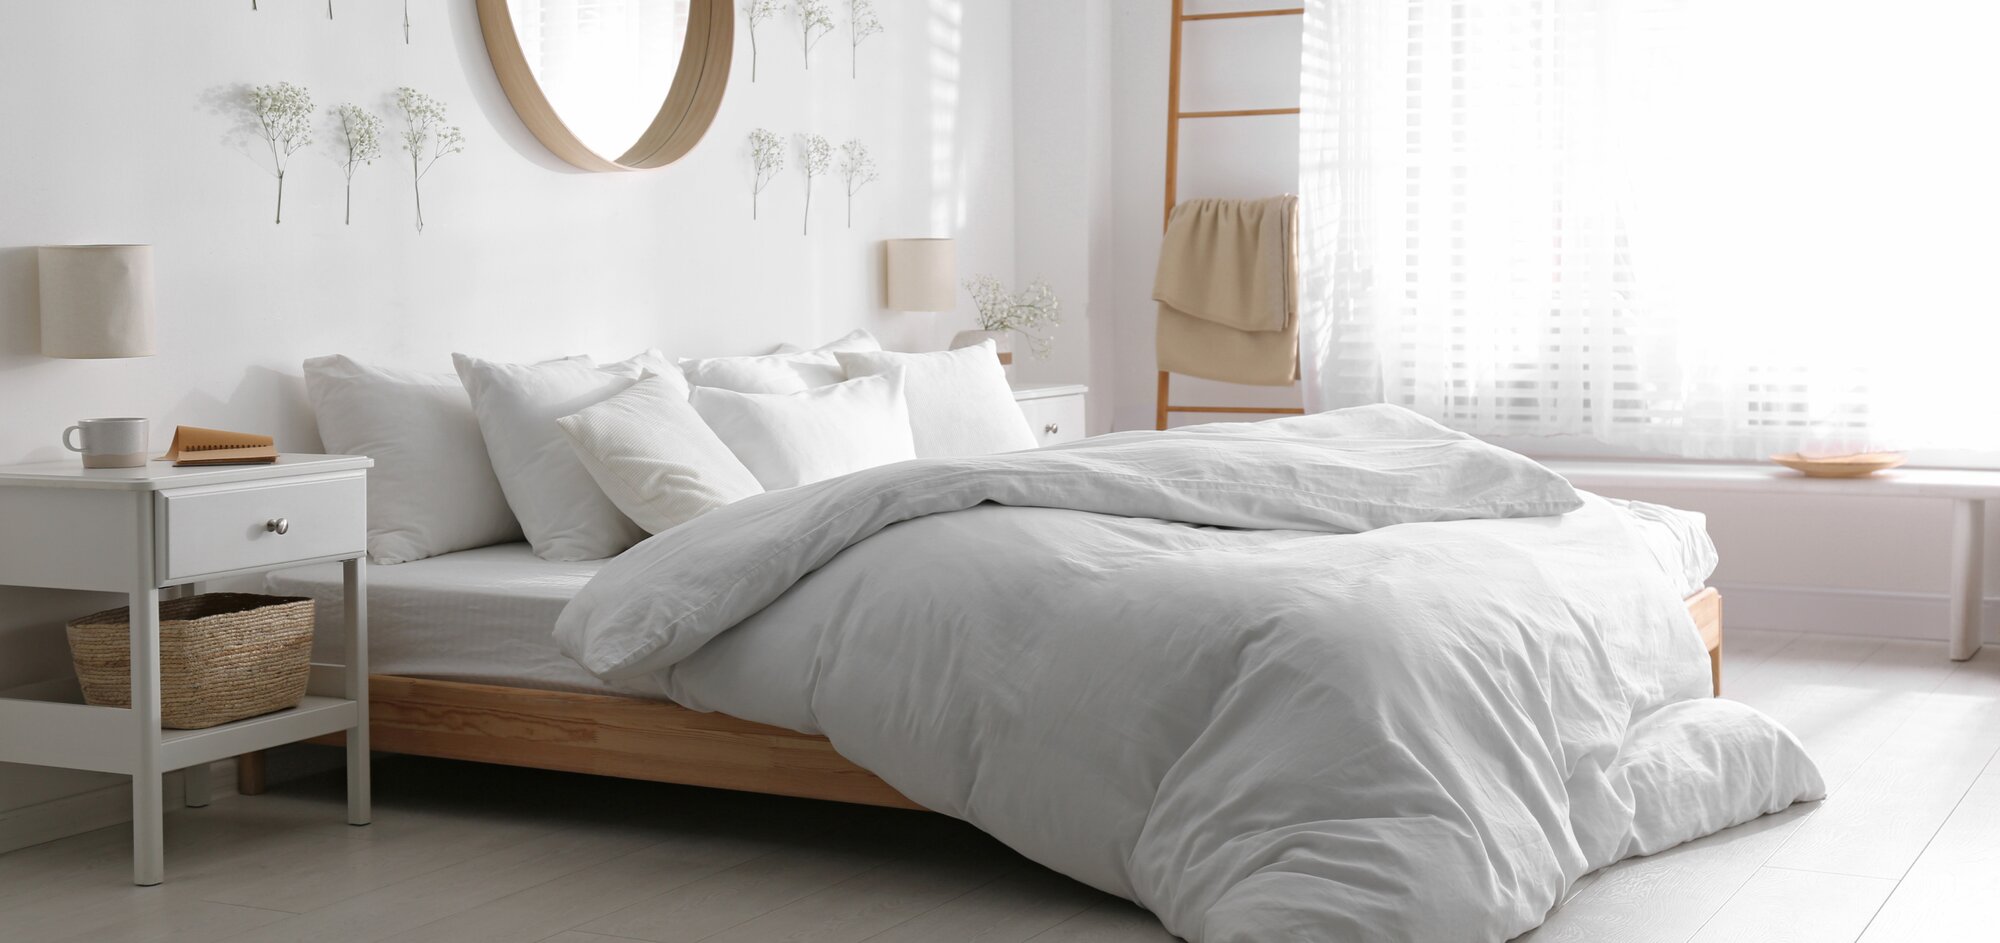 How to Design a Bedroom For Better Rest and Wellness